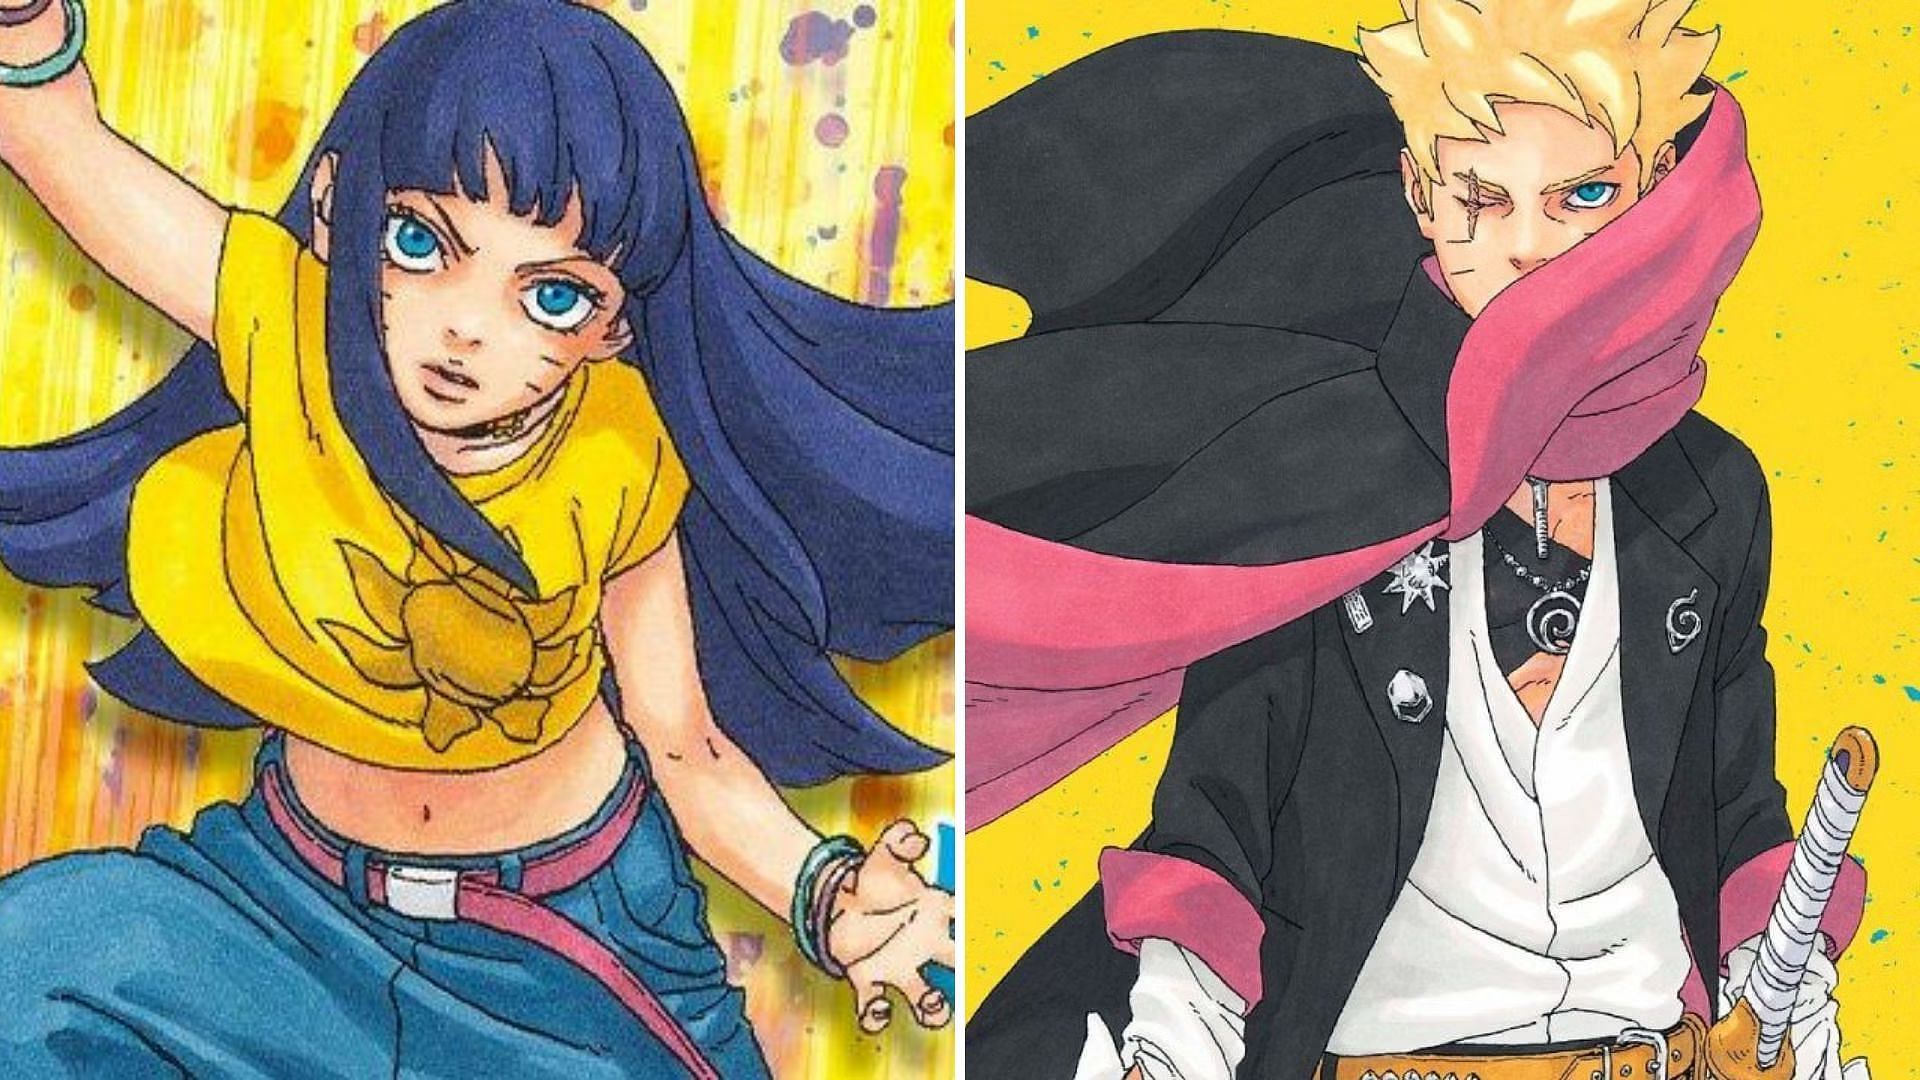 Boruto&#039;s sister could have been the protagonist of the Naruto spin-off series (Image via Shueisha)